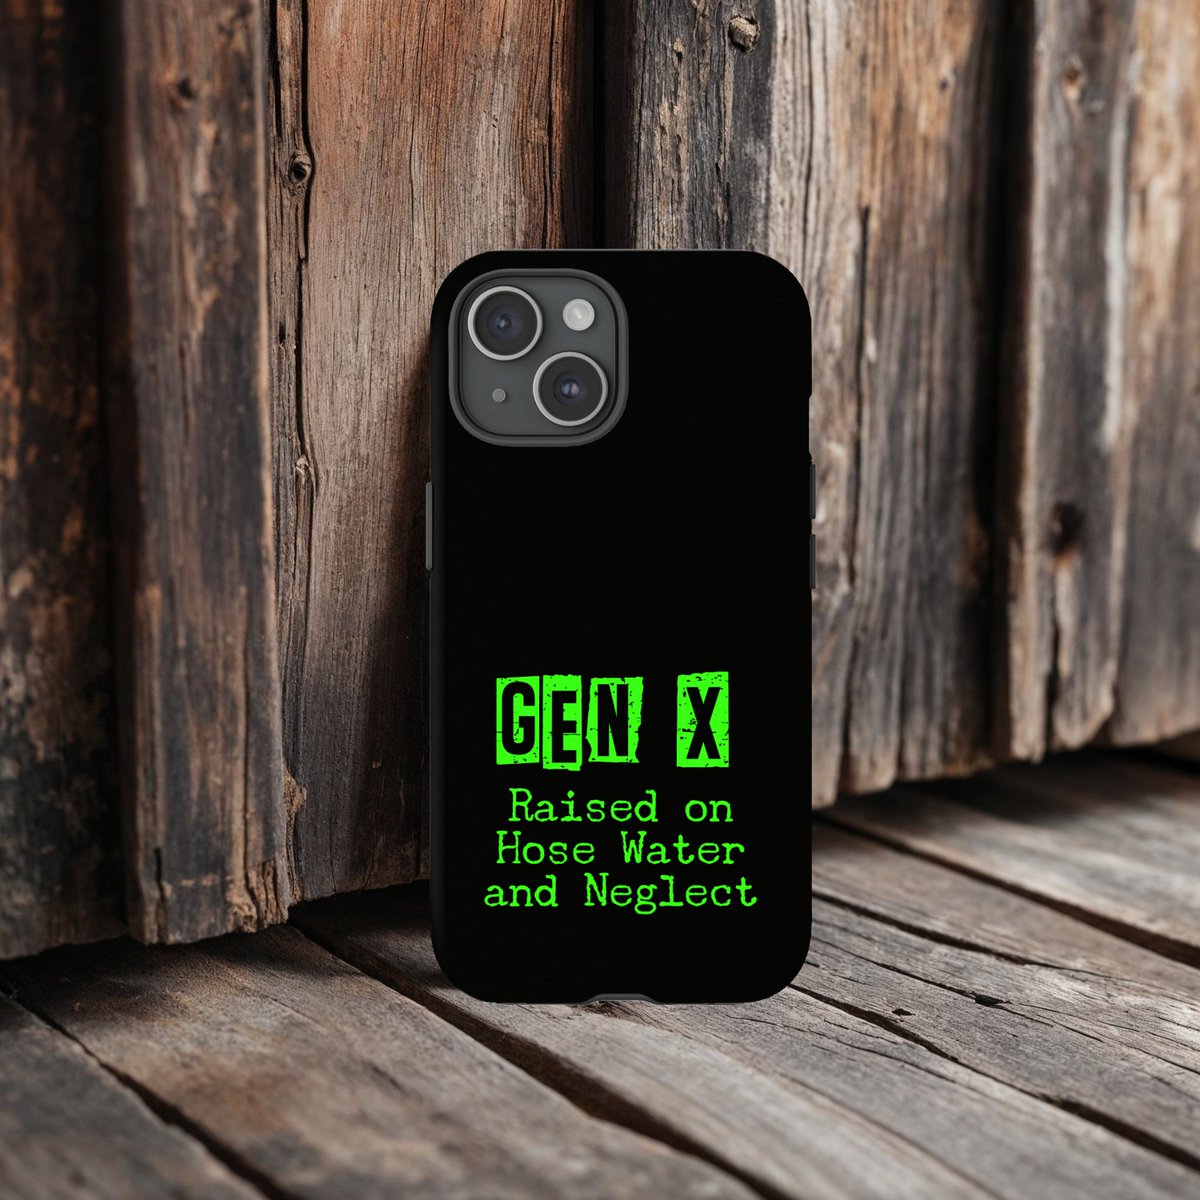 Gen X Phone Case, Raised On Hose Water And Neglect, Tough Cases, iPhone, Pixel, Samsung, Retro Phone Case, 70's, 80's, Latch Key Nostalgia etsy.me/3SGQ9zB #iphone #iphone13case #iphone13procase #iphone13promax #iphone14procase #genx #genxers #raisedonhosewater #80s #70s